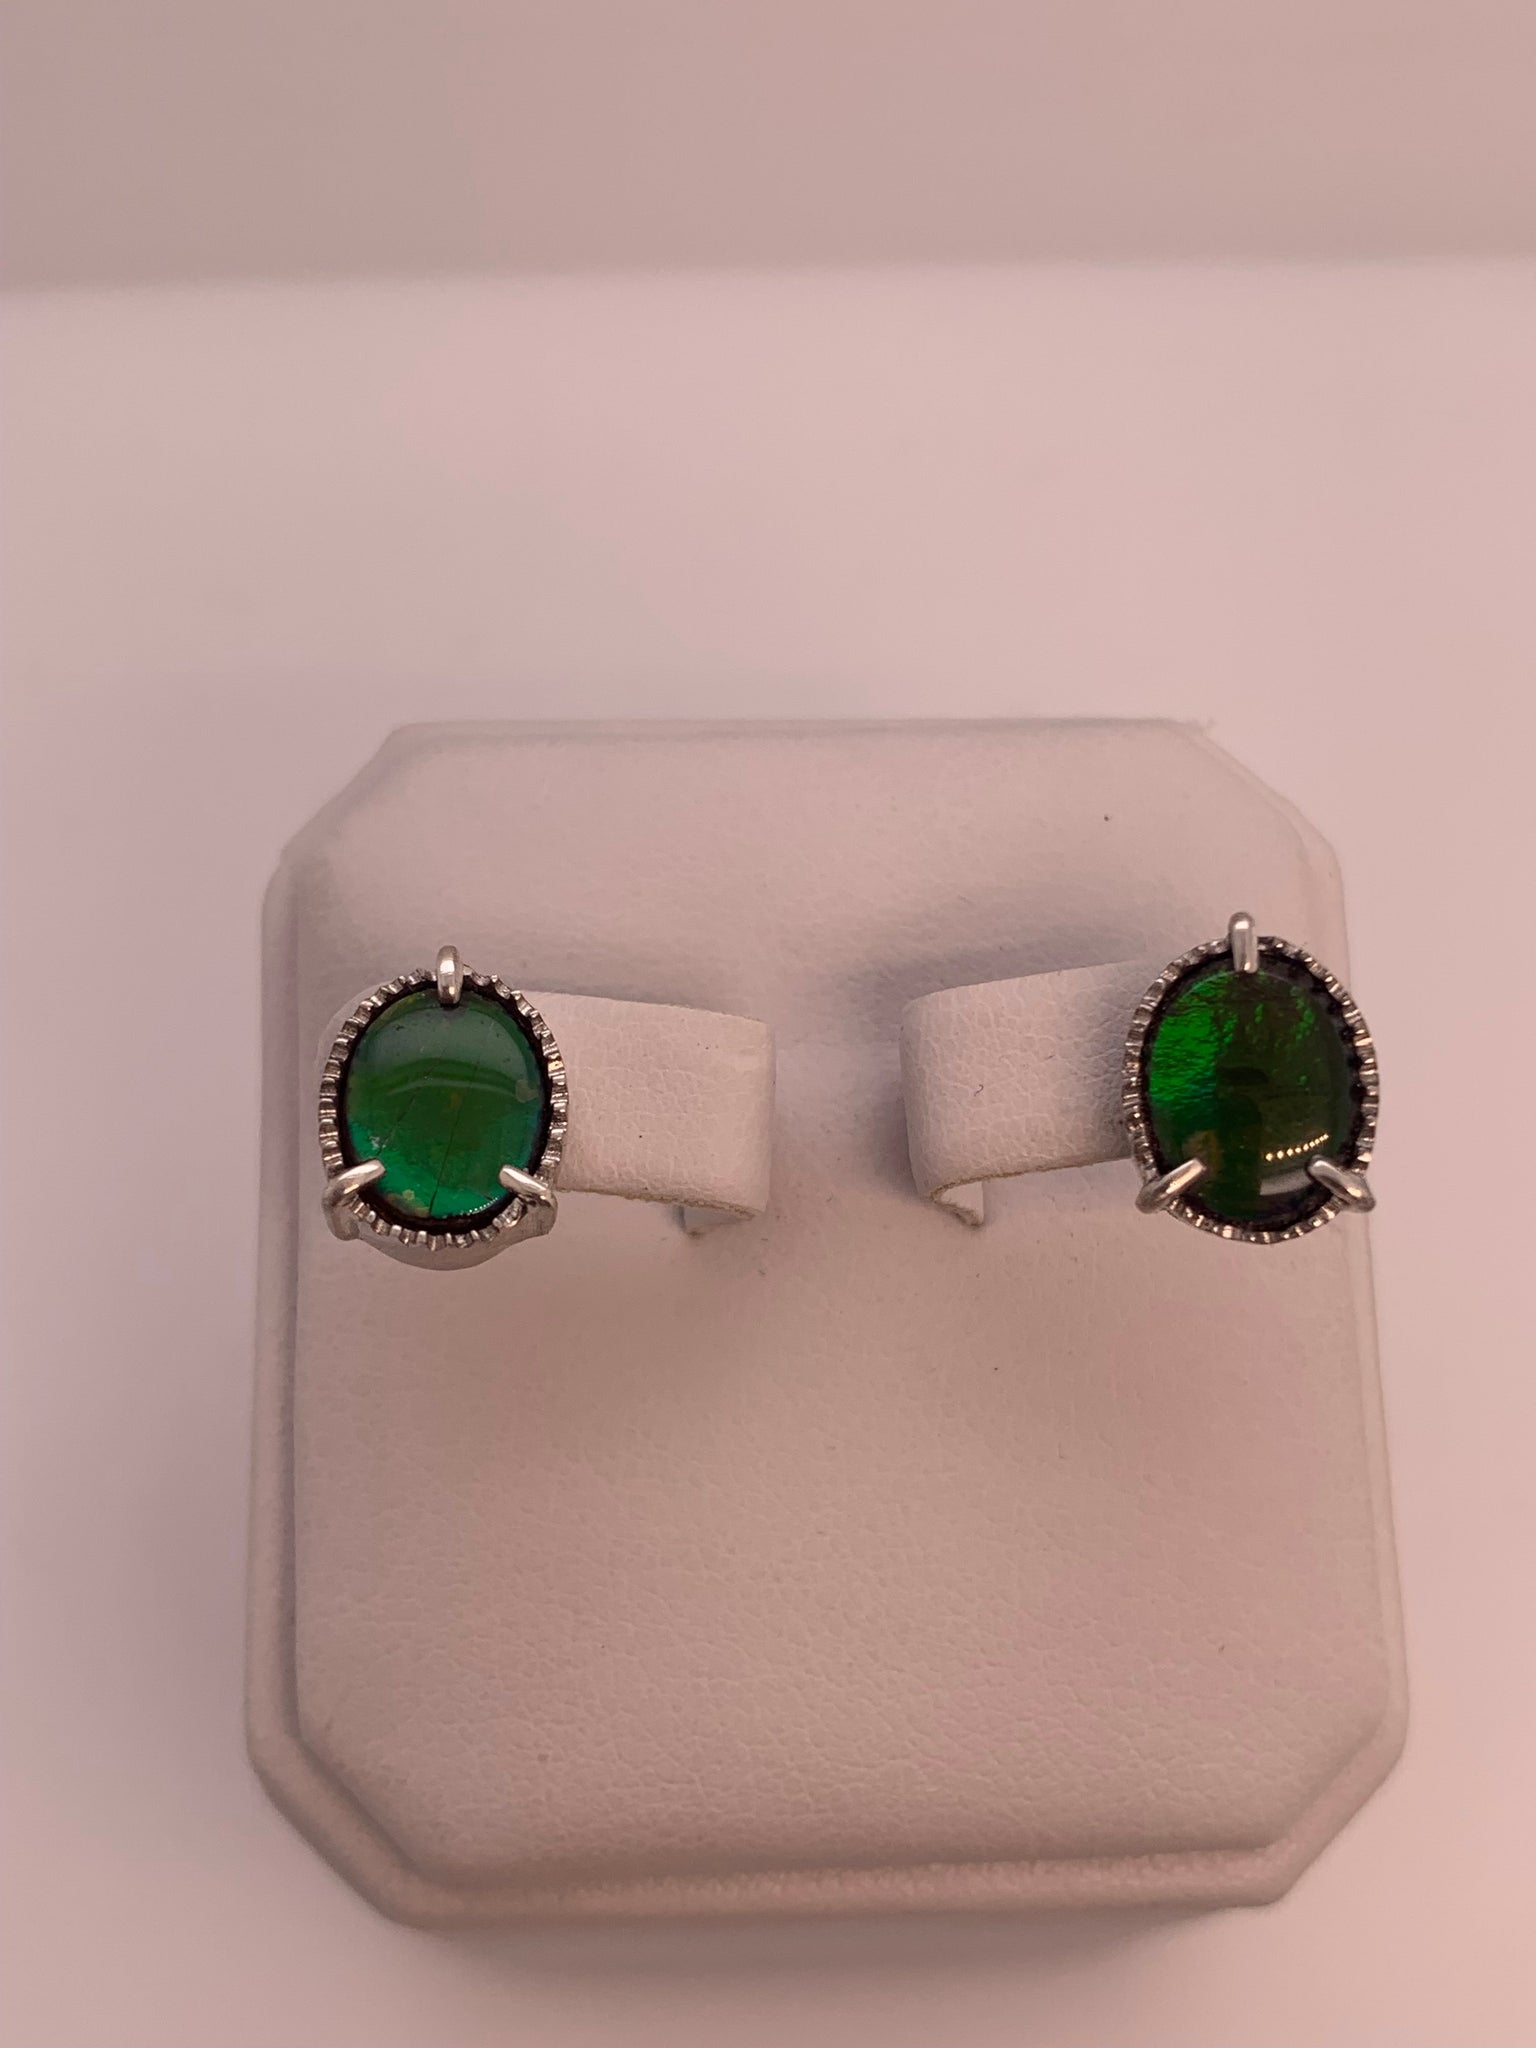 Ammolite Silver Petite Oval Earrings with Teal and Green Flash PN: E21131 %product from Empire Ammolite